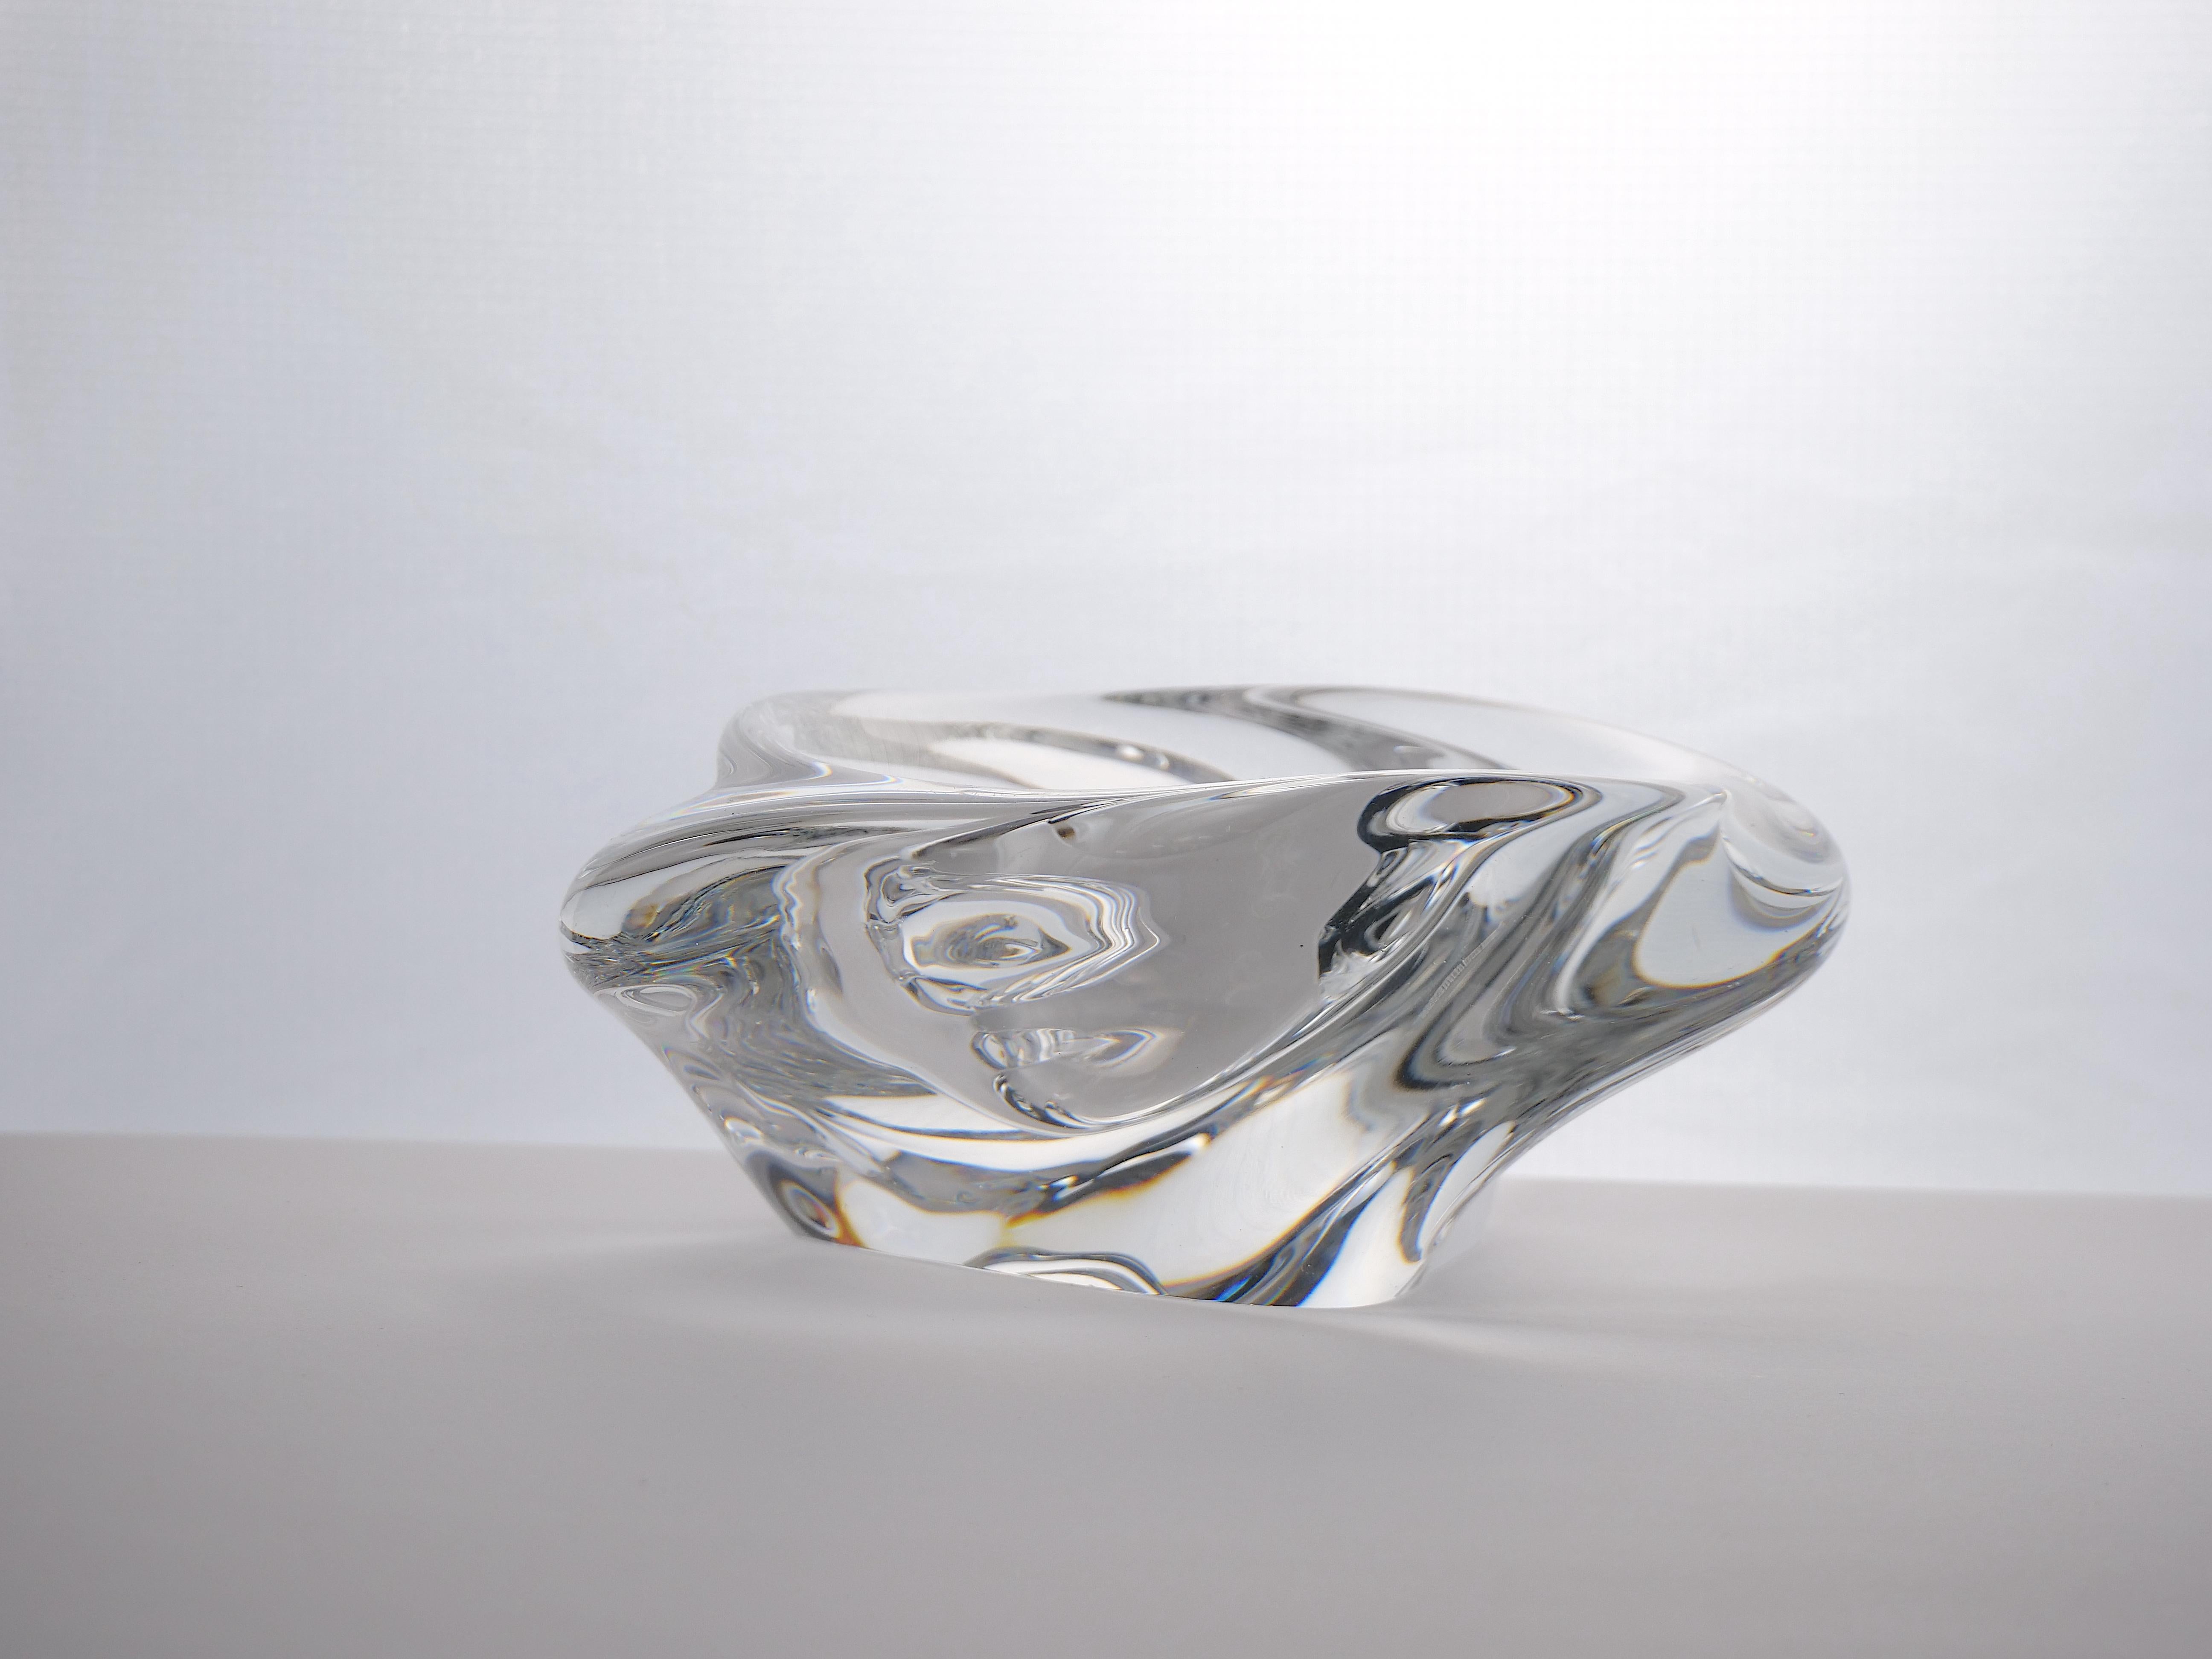 Exquisite Sculptural Baccarat Triangular Shape Paper Weight / Ash Tray 4